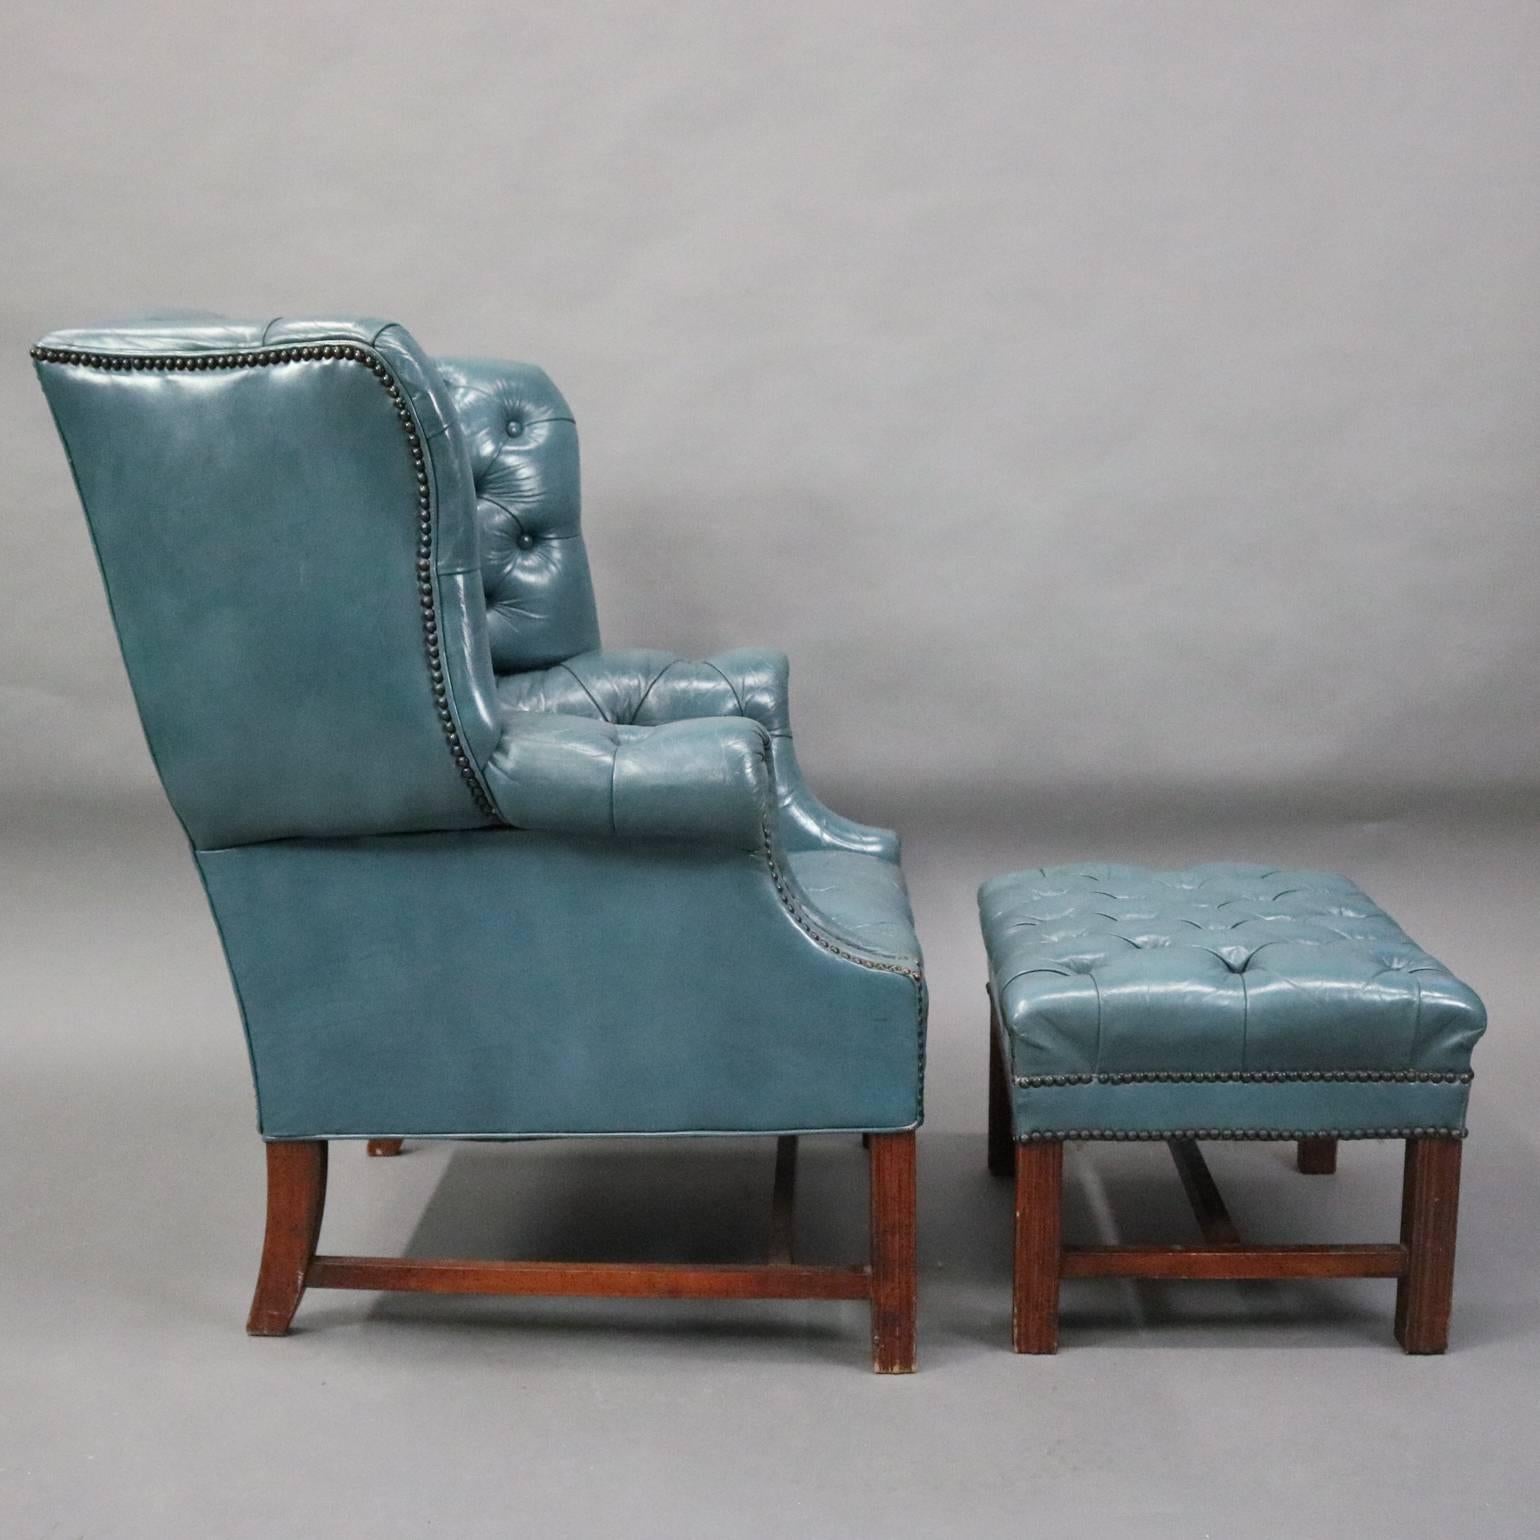 Vintage English Hepplewhite style Chesterfield wingback armchair and ottoman features button tufted leather upholstery and deep flared wings, circa 1960

Measures: 40.5